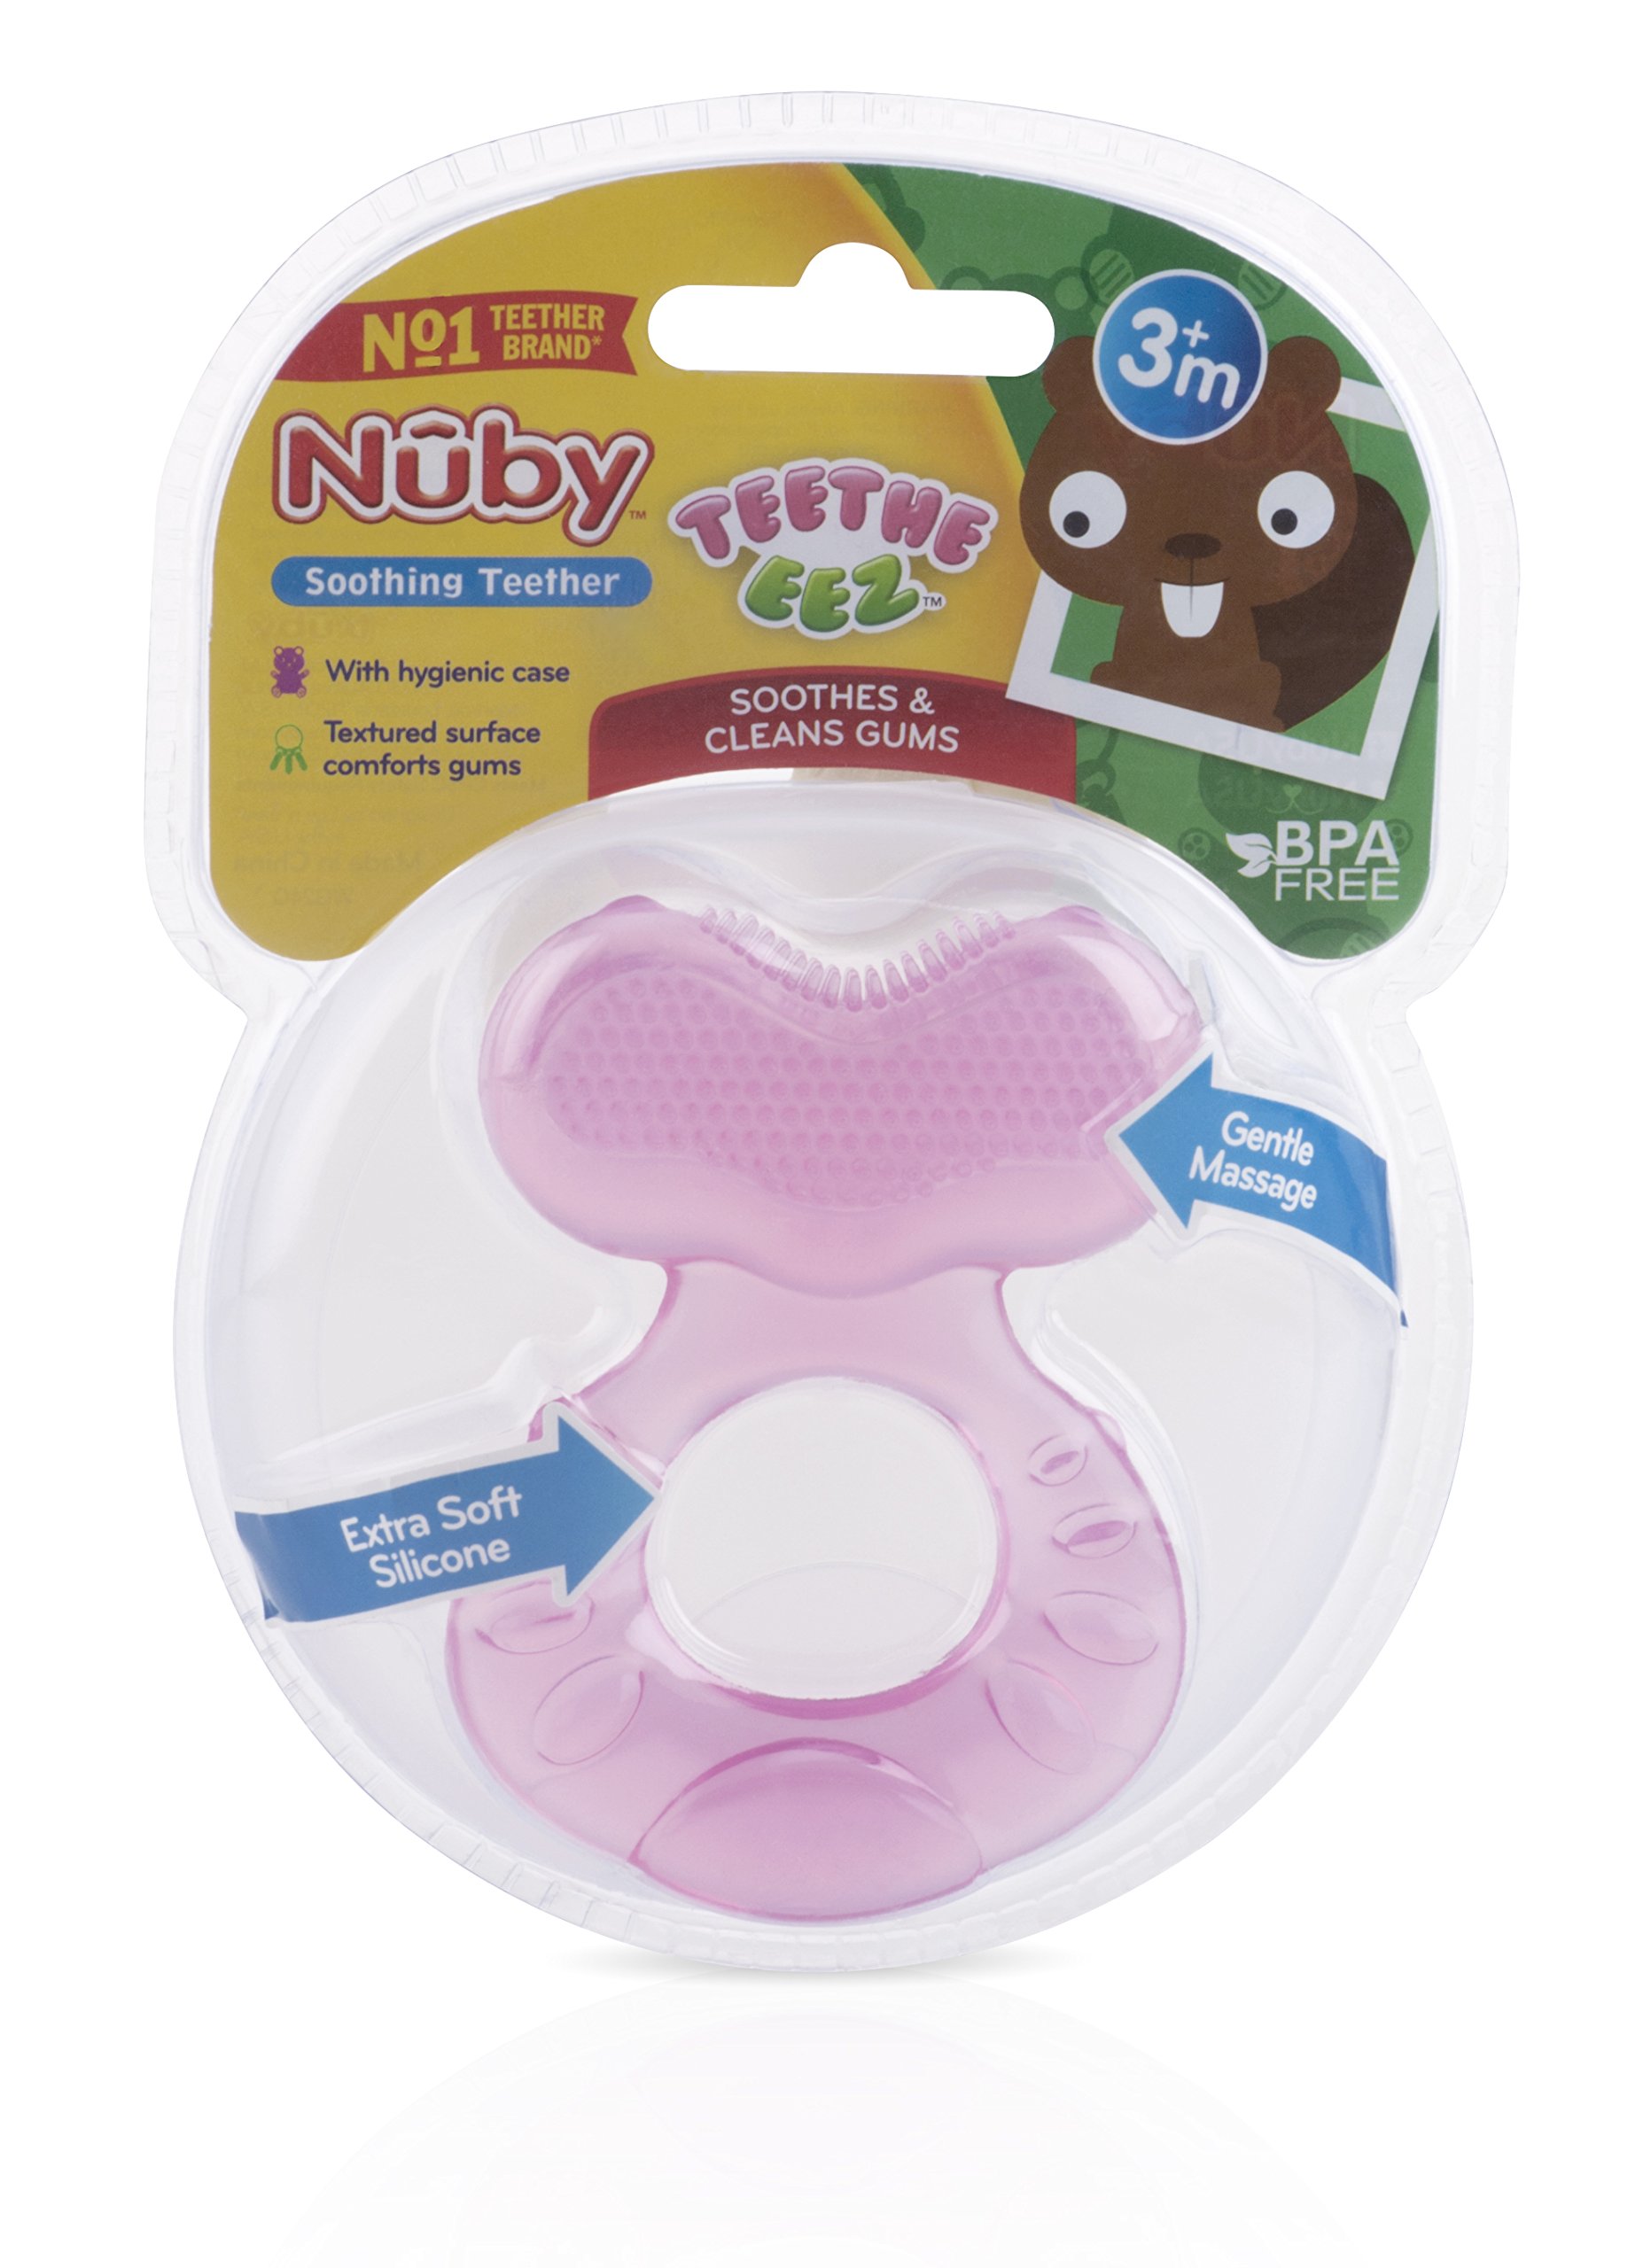 Nuby Silicone Teethe-eez Teether with Bristles, Includes Hygienic Case, Pink